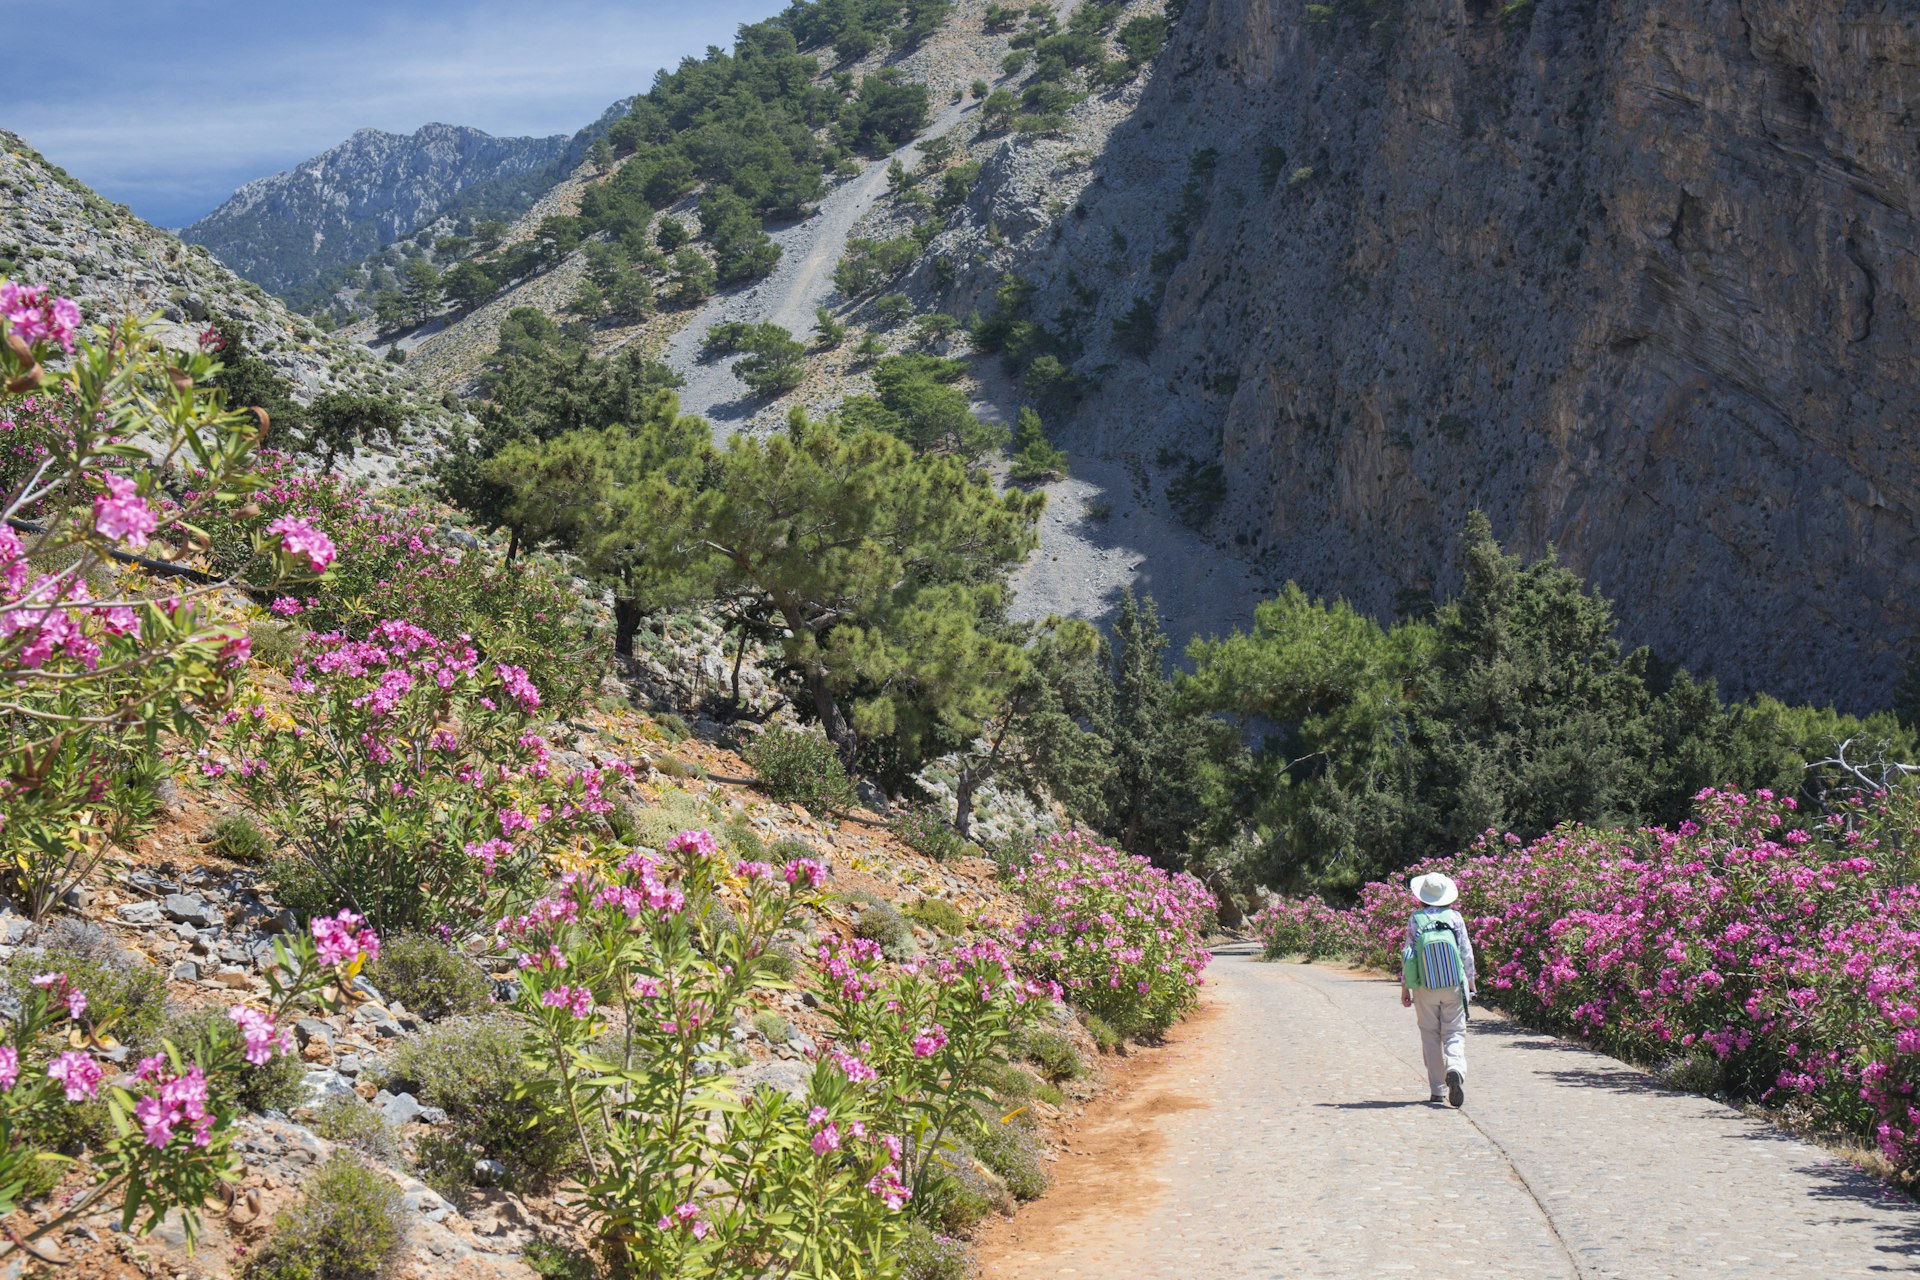 A hiker surrounded by pink oleander in the Samaria Gorge, Crete, Greece